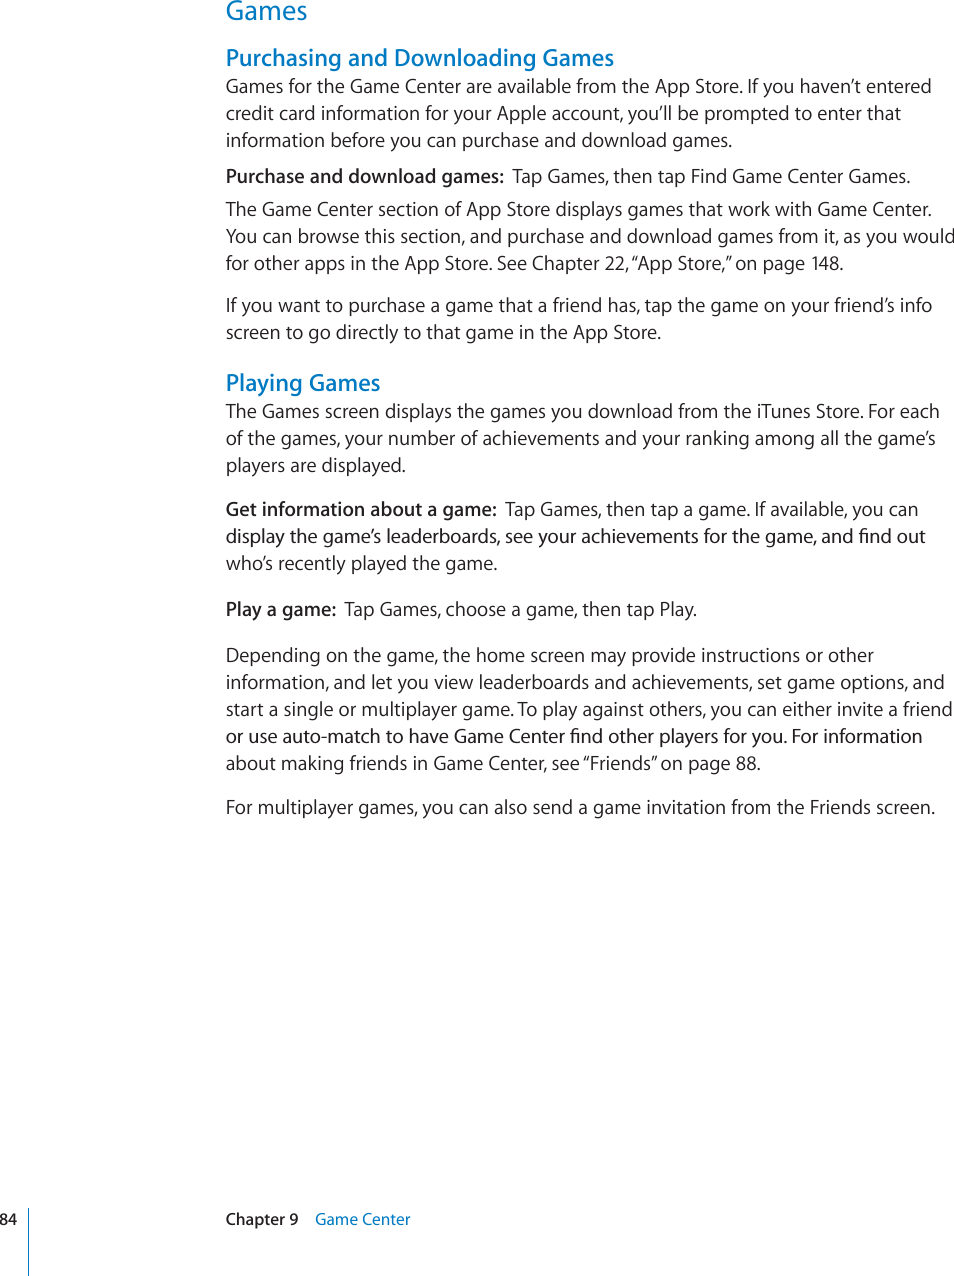 GamesPurchasing and Downloading GamesGames for the Game Center are available from the App Store. If you haven’t entered credit card information for your Apple account, you’ll be prompted to enter that information before you can purchase and download games.Purchase and download games: Tap Games, then tap Find Game Center Games. The Game Center section of App Store displays games that work with Game Center. You can browse this section, and purchase and download games from it, as you would for other apps in the App Store. See Chapter 22,“App Store,” on page 148.If you want to purchase a game that a friend has, tap the game on your friend’s info screen to go directly to that game in the App Store. Playing GamesThe Games screen displays the games you download from the iTunes Store. For each of the games, your number of achievements and your ranking among all the game’s players are displayed.Get information about a game: Tap Games, then tap a game. If available, you can FKURNC[VJGICOG¨UNGCFGTDQCTFUUGG[QWTCEJKGXGOGPVUHQTVJGICOGCPF°PFQWVwho’s recently played the game.Play a game: Tap Games, choose a game, then tap Play.Depending on the game, the home screen may provide instructions or other information, and let you view leaderboards and achievements, set game options, and start a single or multiplayer game. To play against others, you can either invite a friend QTWUGCWVQOCVEJVQJCXG)COG%GPVGT°PFQVJGTRNC[GTUHQT[QW(QTKPHQTOCVKQPabout making friends in Game Center, see “Friends” on page 88.For multiplayer games, you can also send a game invitation from the Friends screen.84 Chapter 9 Game Center